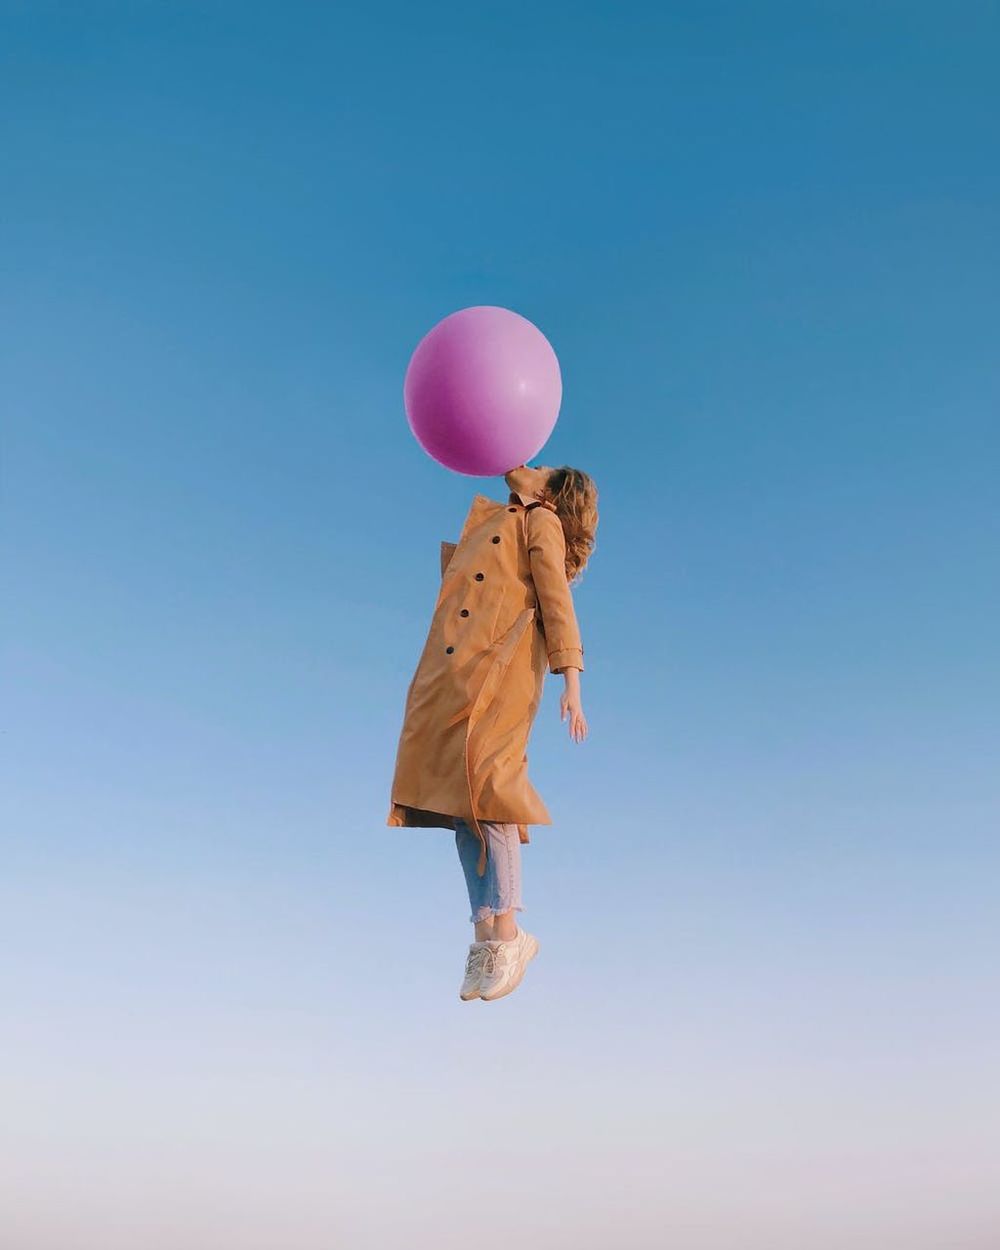 balloon, mid-air, one person, full length, blue, sky, toy, nature, fun, copy space, clear sky, childhood, child, emotion, happiness, women, flying, adult, carefree, day, motion, helium balloon, positive emotion, holding, casual clothing, jumping, joy, clothing, outdoors, sunny, pink, enjoyment, female, leisure activity, person, standing, vitality